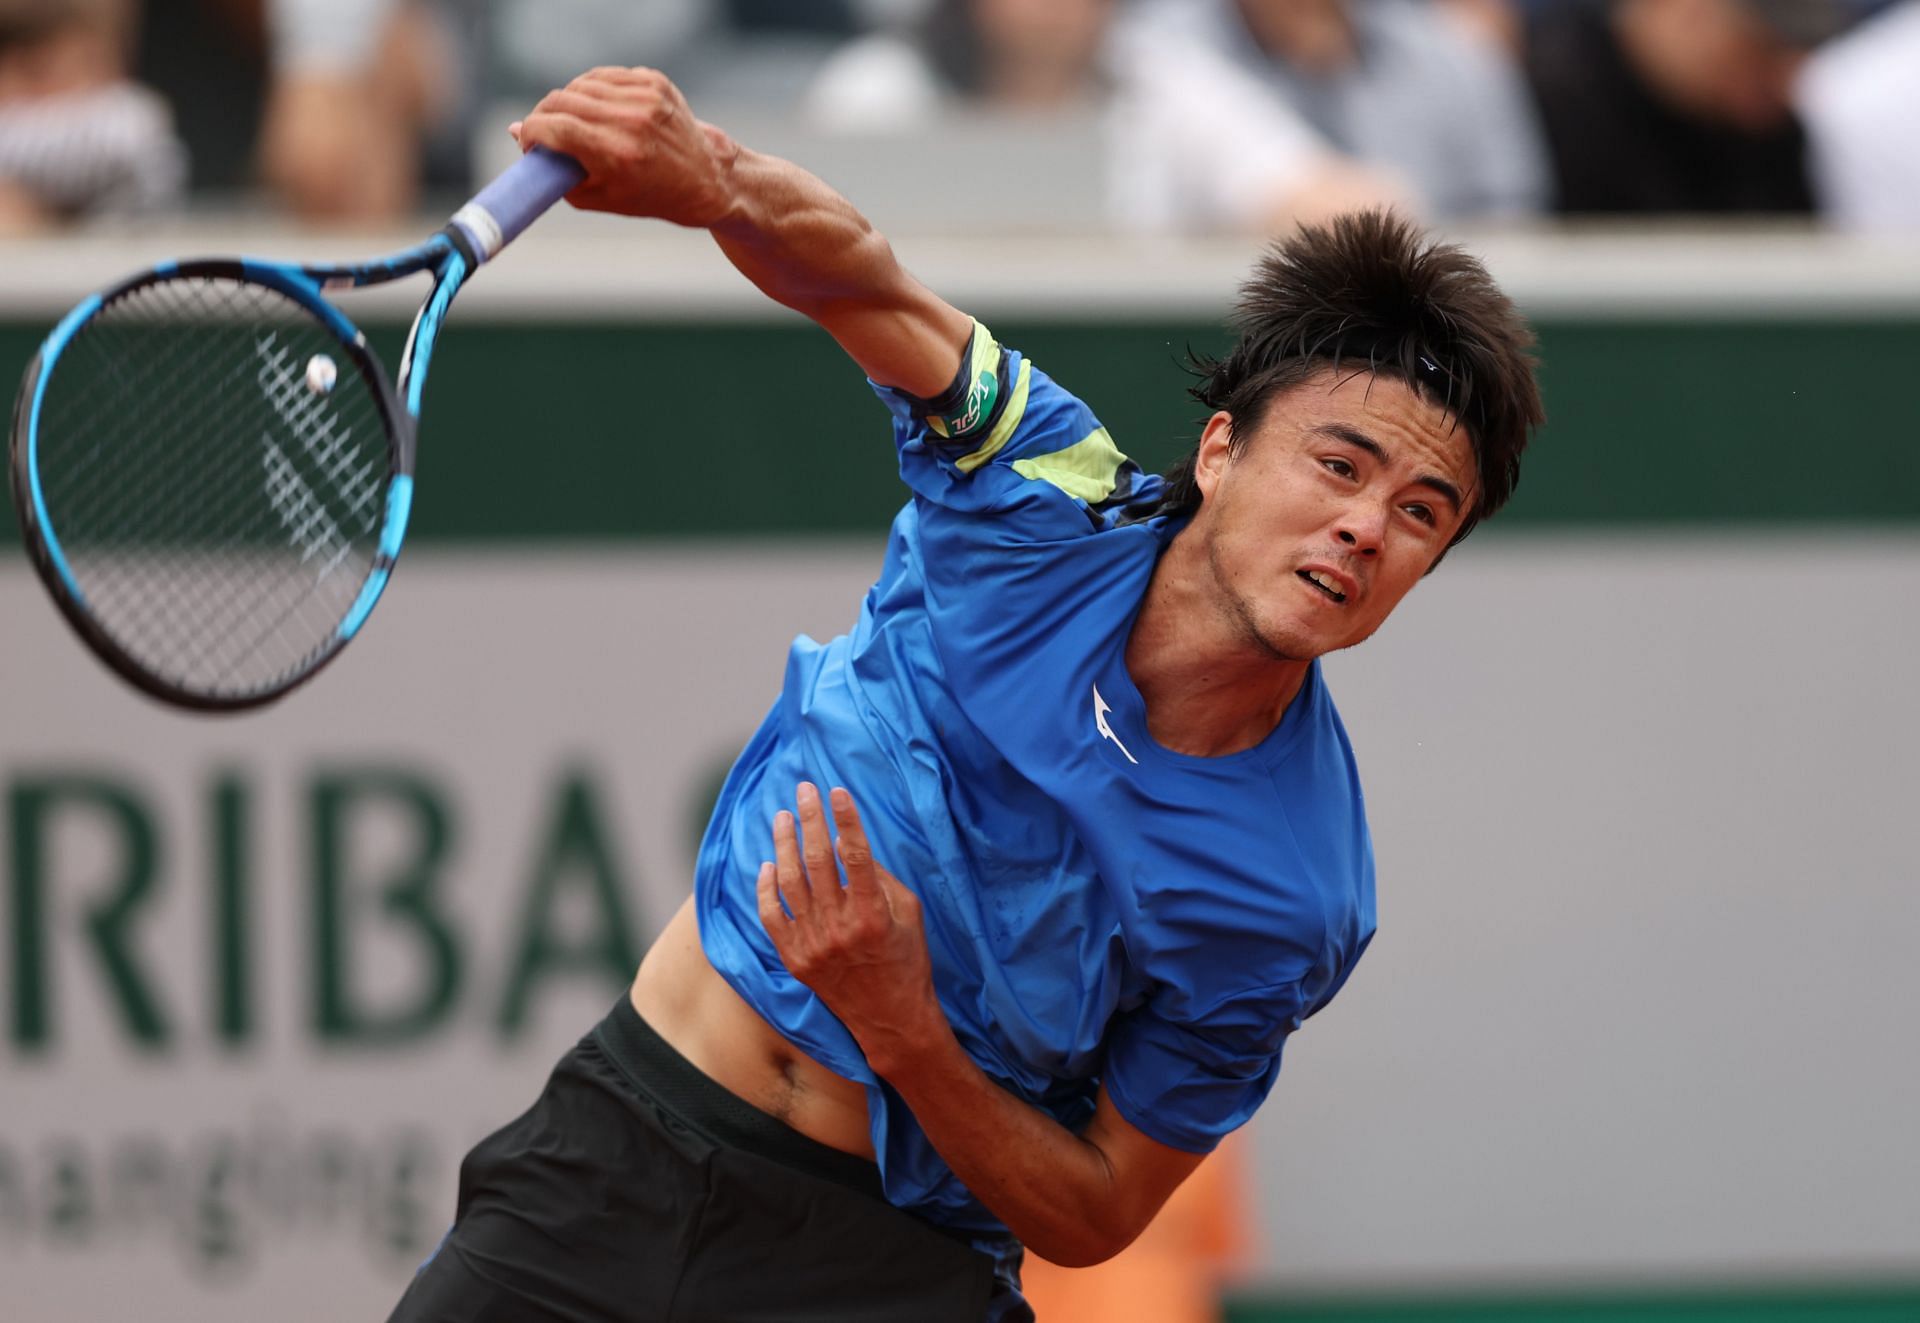 Taro Daniel in action at the 2022 French Open.